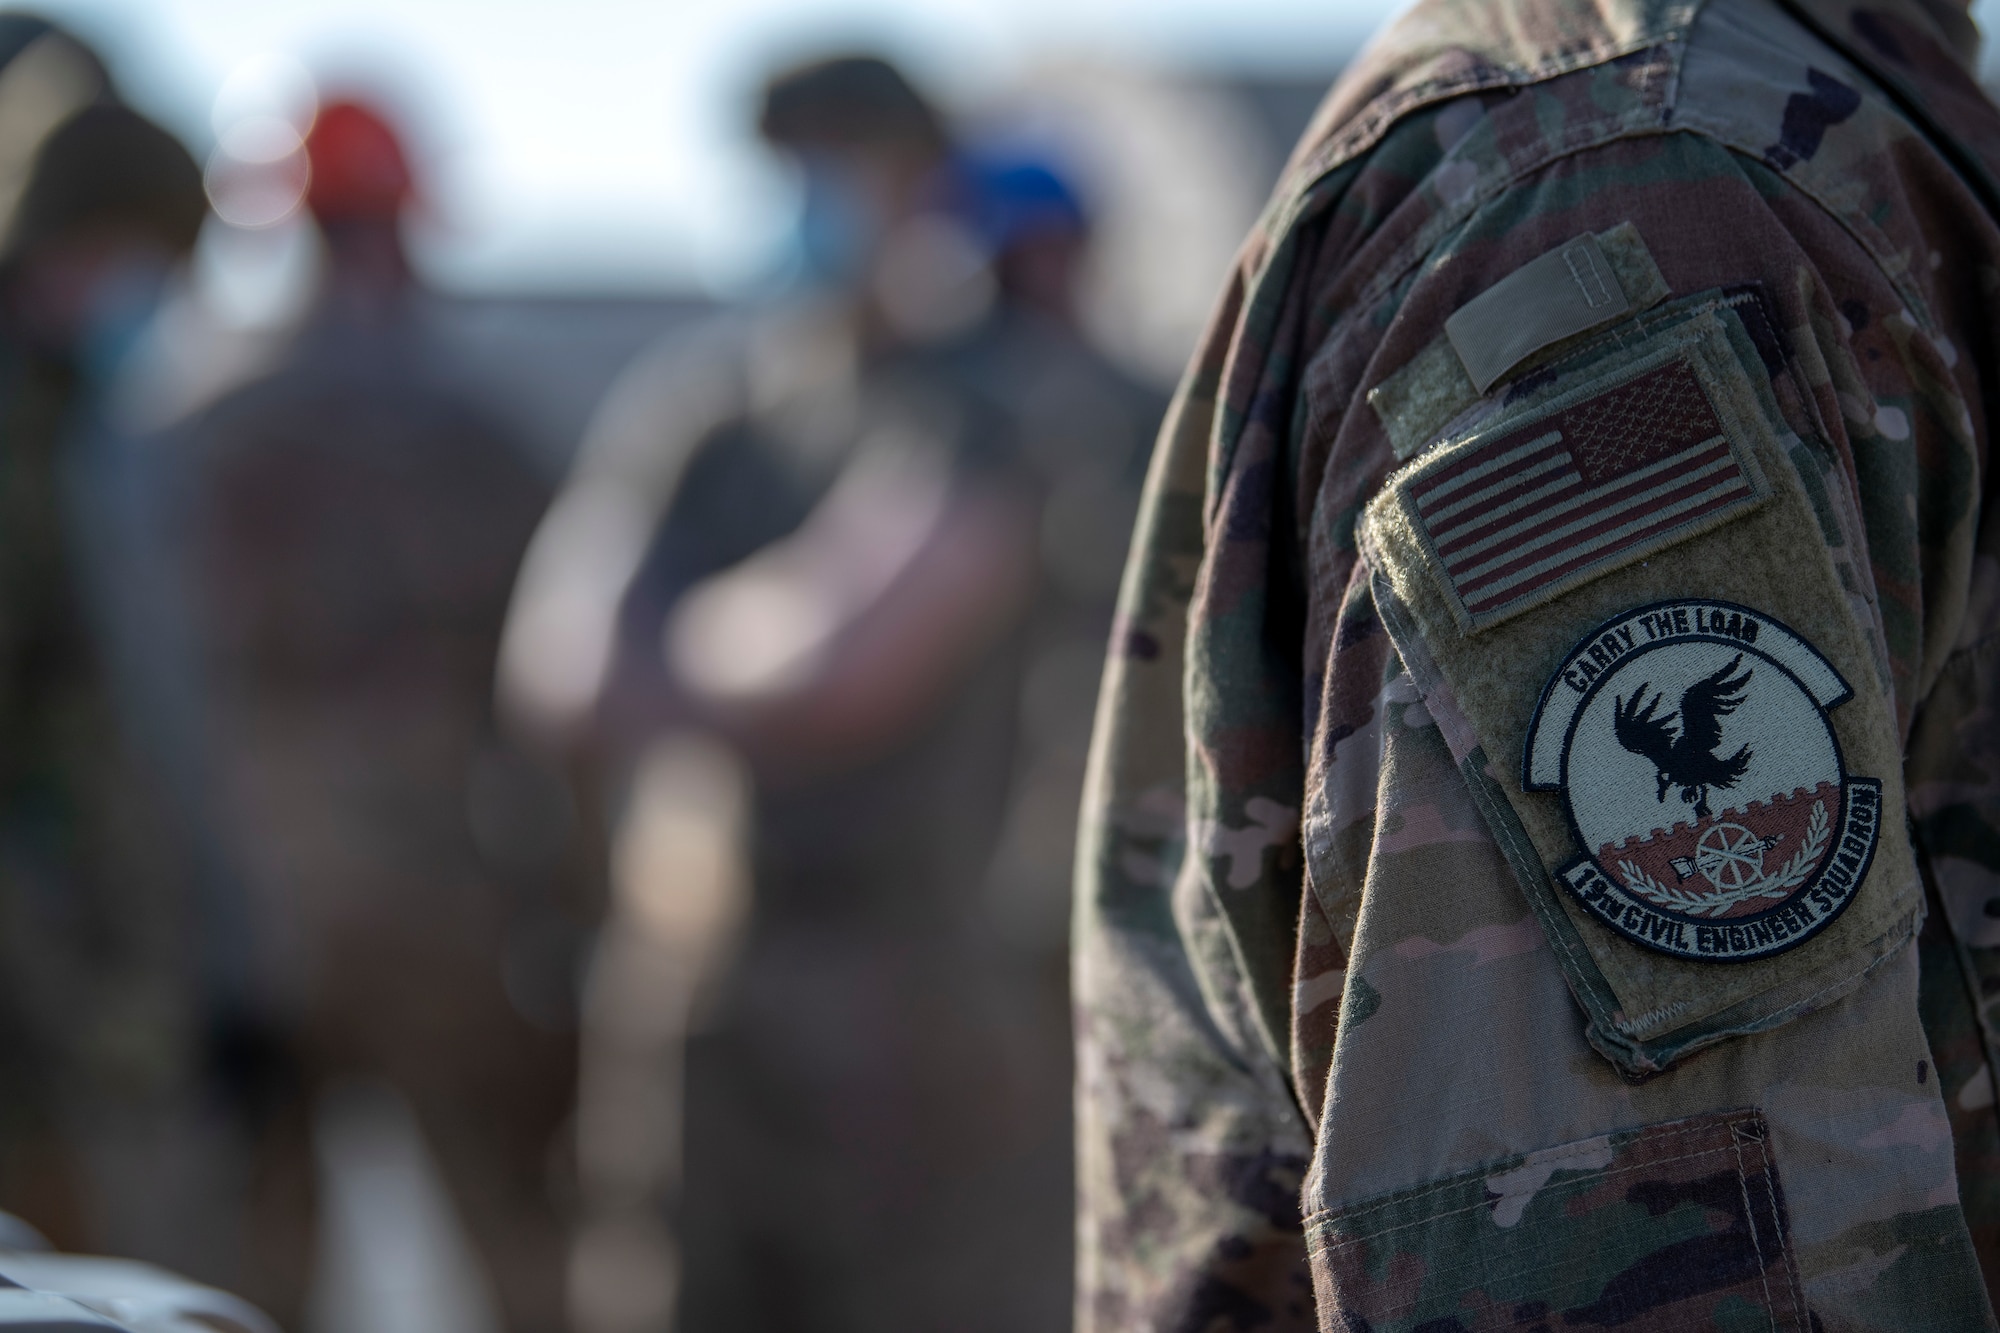 the 19 CES Patch rests on the shoulder of an Airman